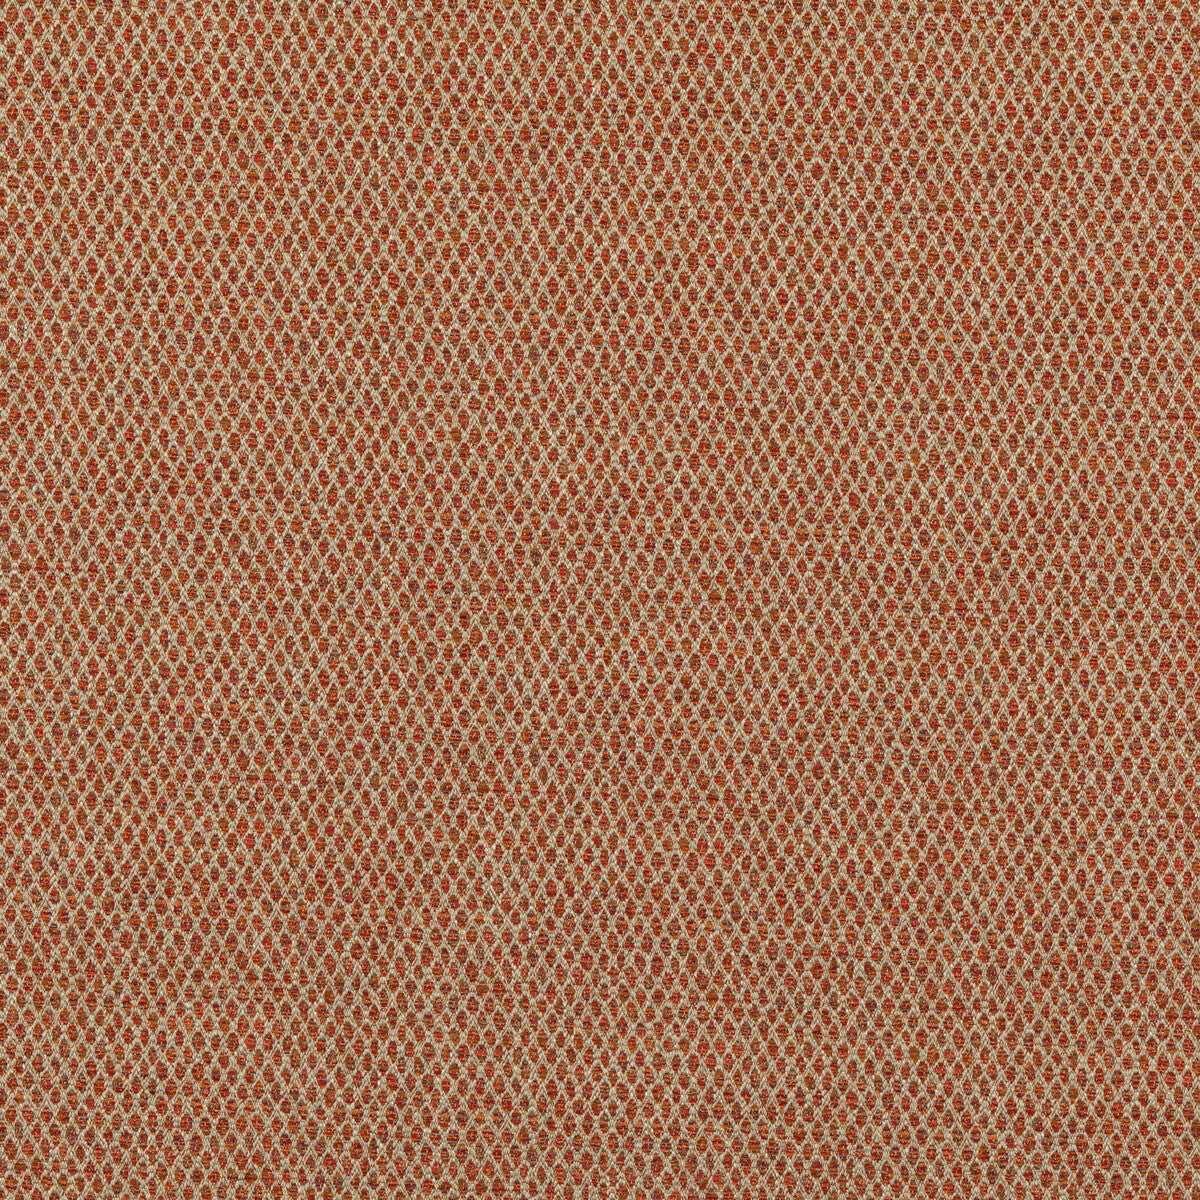 Pednor fabric in spice color - pattern BF10874.330.0 - by G P &amp; J Baker in the Essential Colours II collection